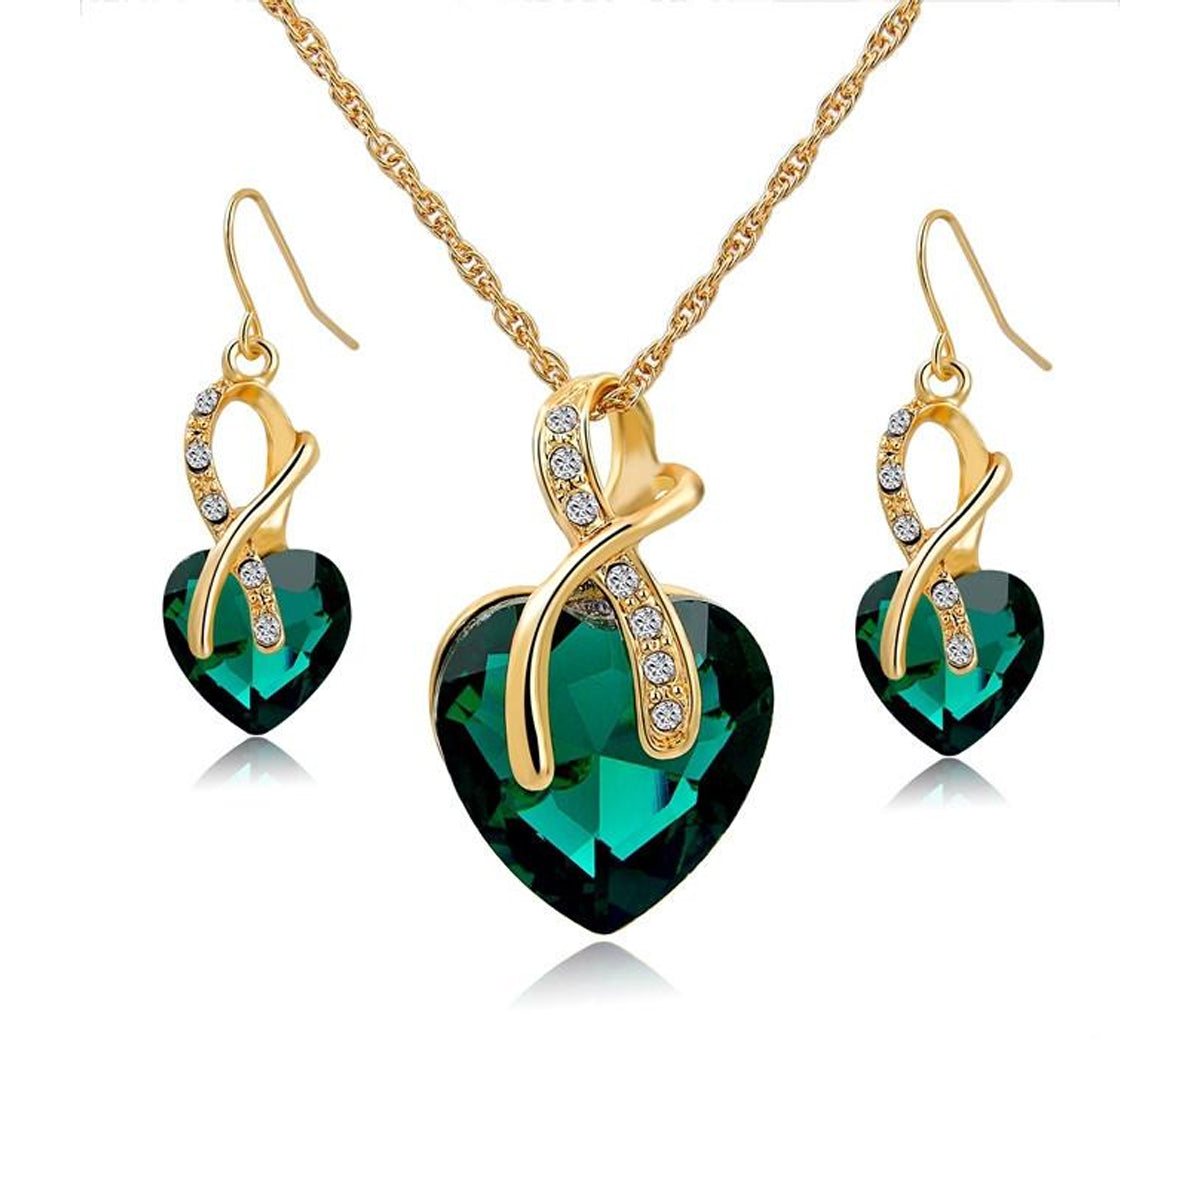 Wishful Heart Necklace and Earrings Set